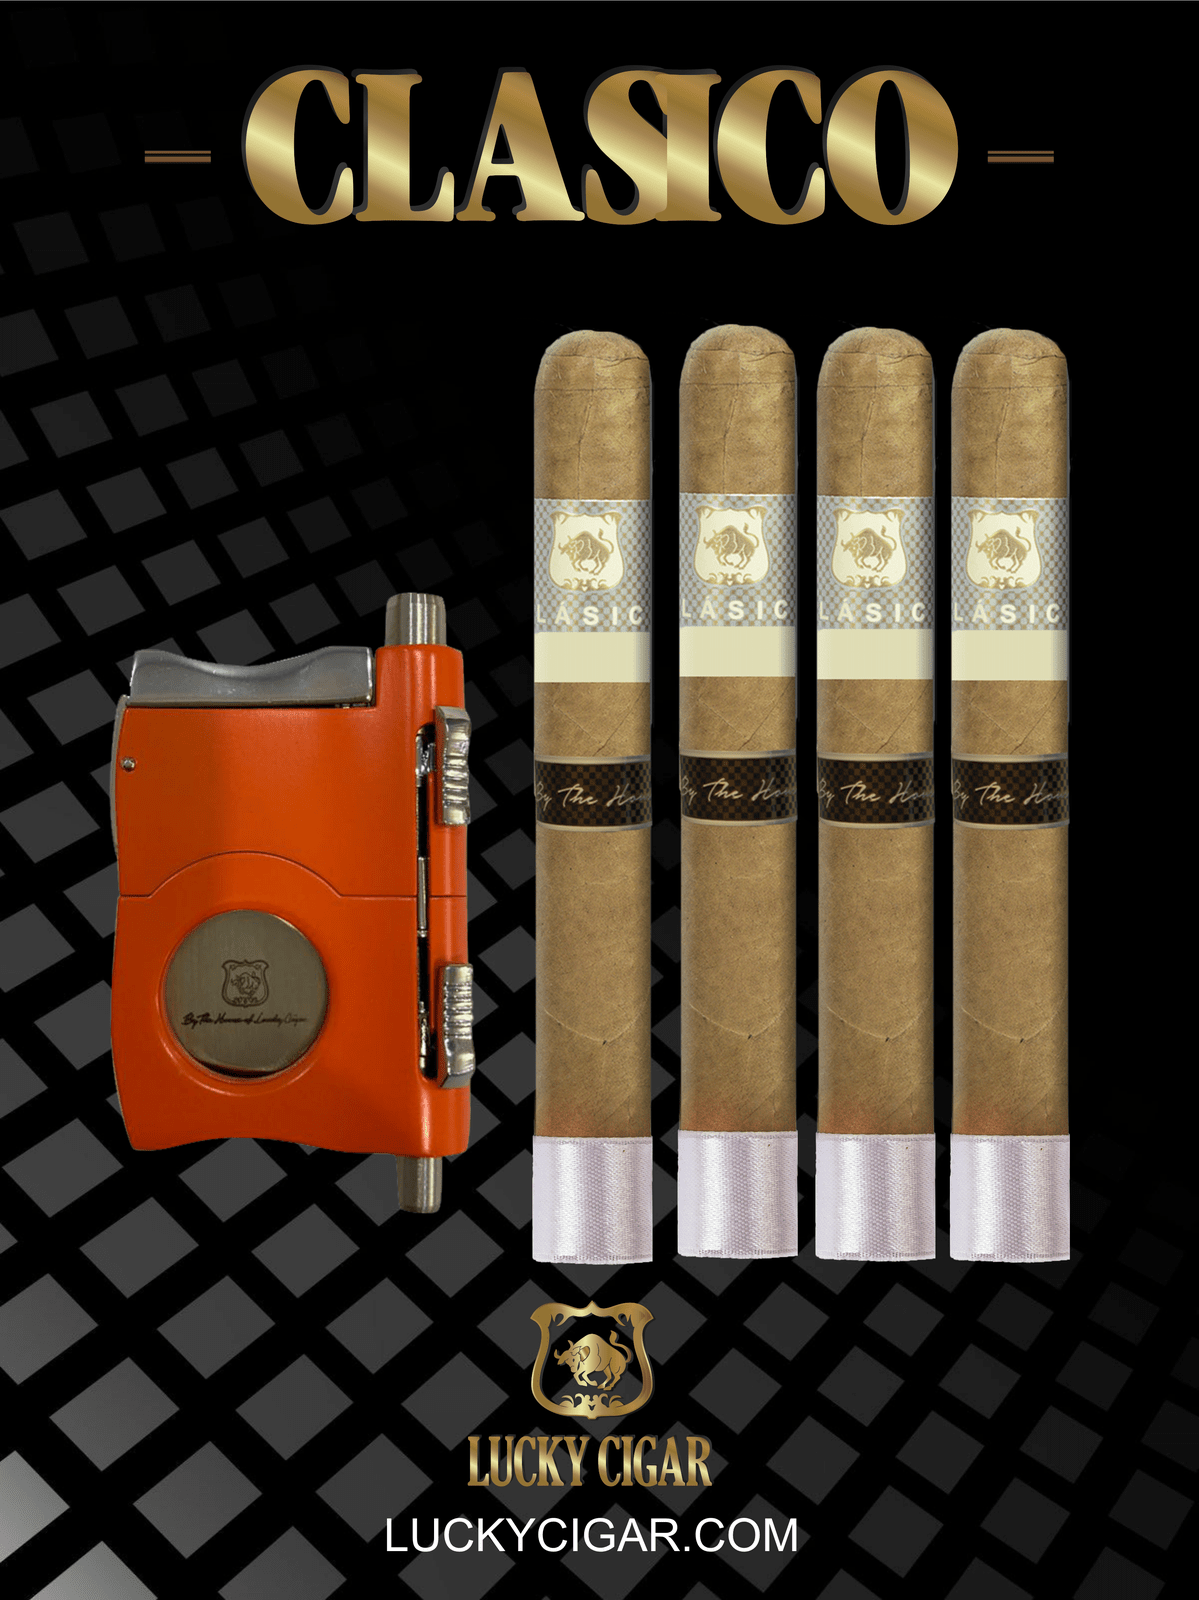 Classic Cigars - Classico by Lucky Cigar: Set of 4 Cigars, 4 Toro with Cutter, Puncher